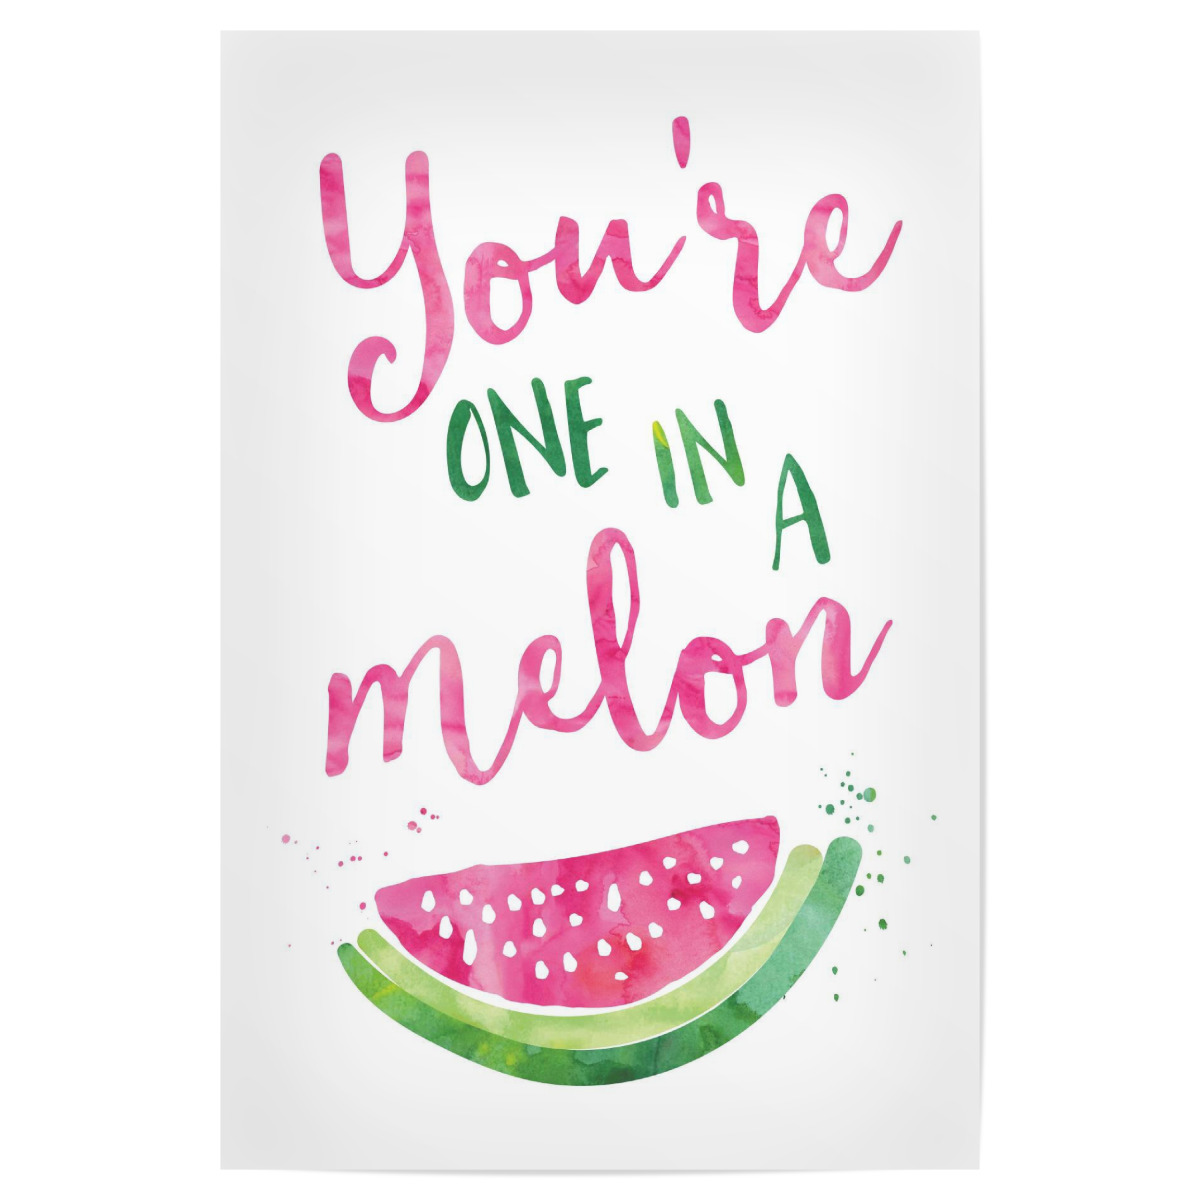 Purchase the You're one in a melon as a Poster at artboxONE